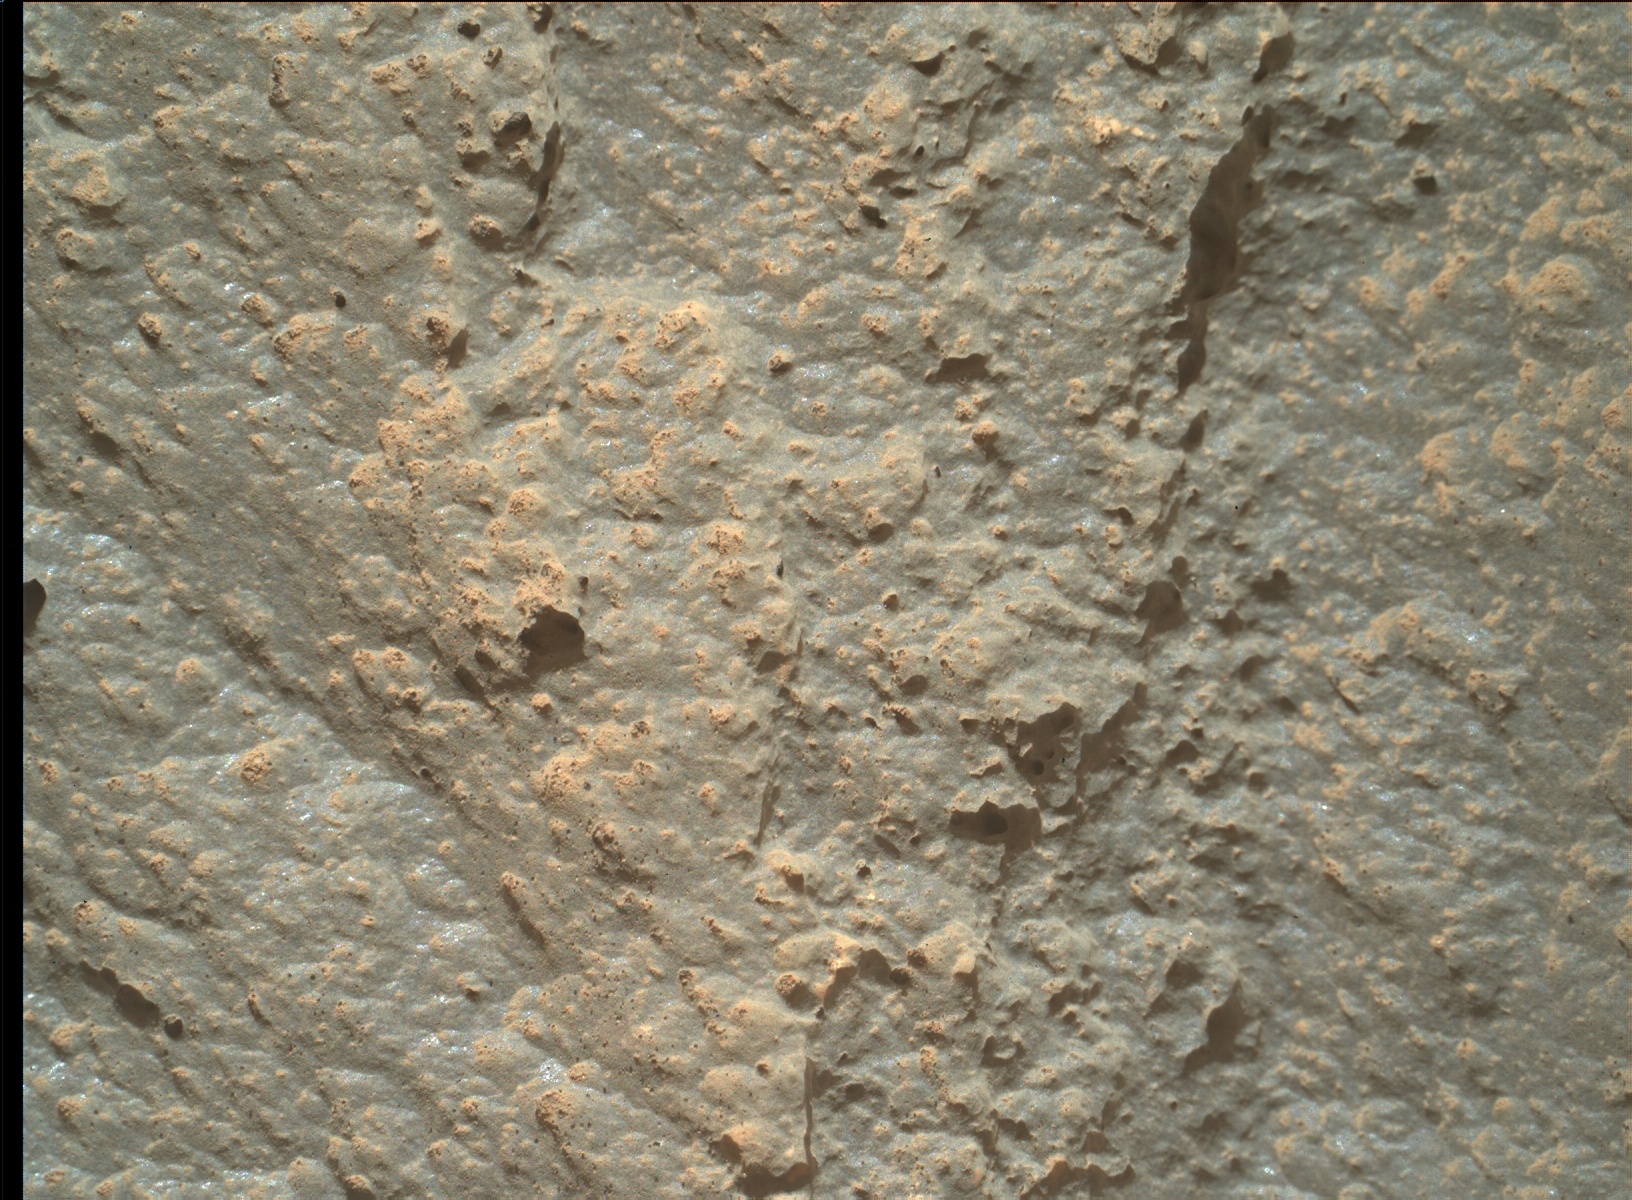 Nasa's Mars rover Curiosity acquired this image using its Mars Hand Lens Imager (MAHLI) on Sol 2632